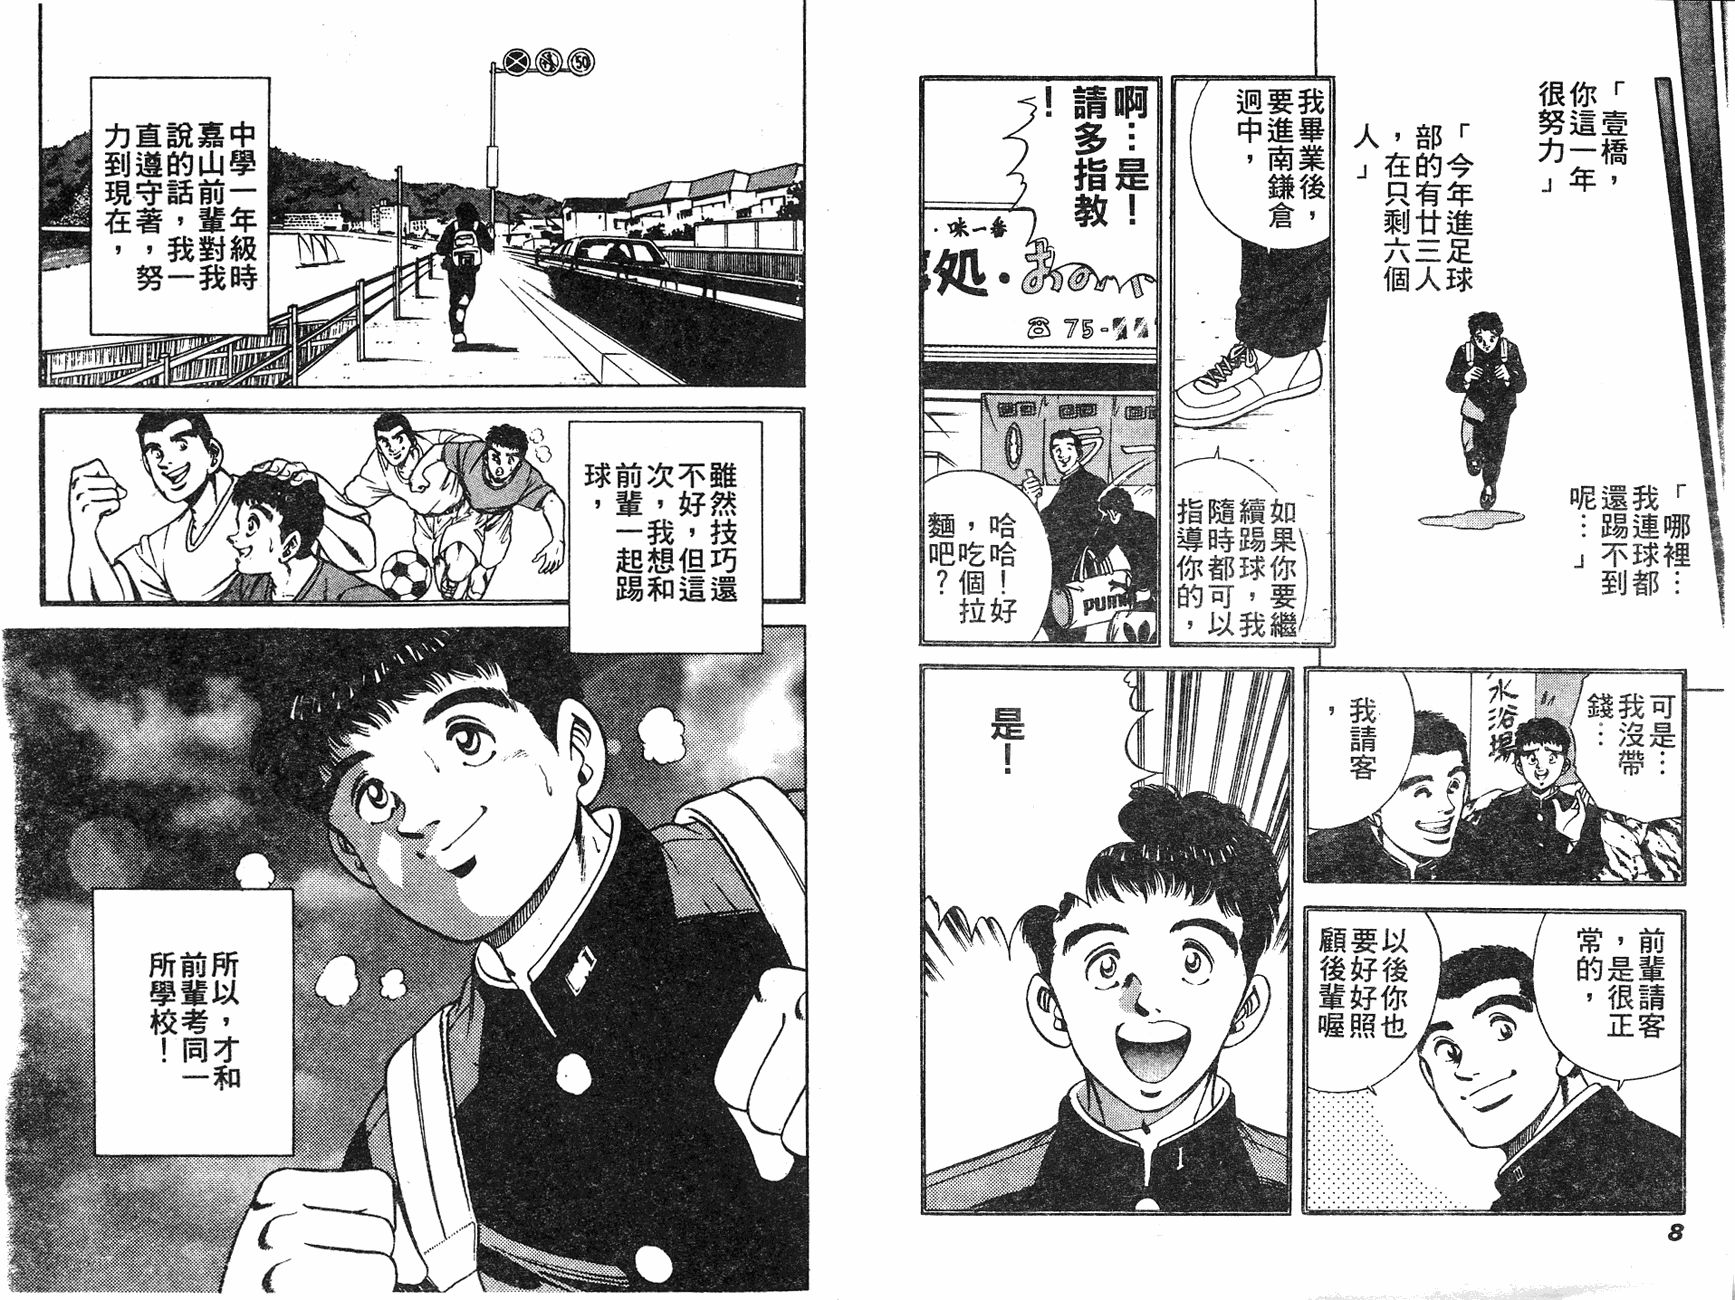 Two Top - 第01卷(1/3) - 6